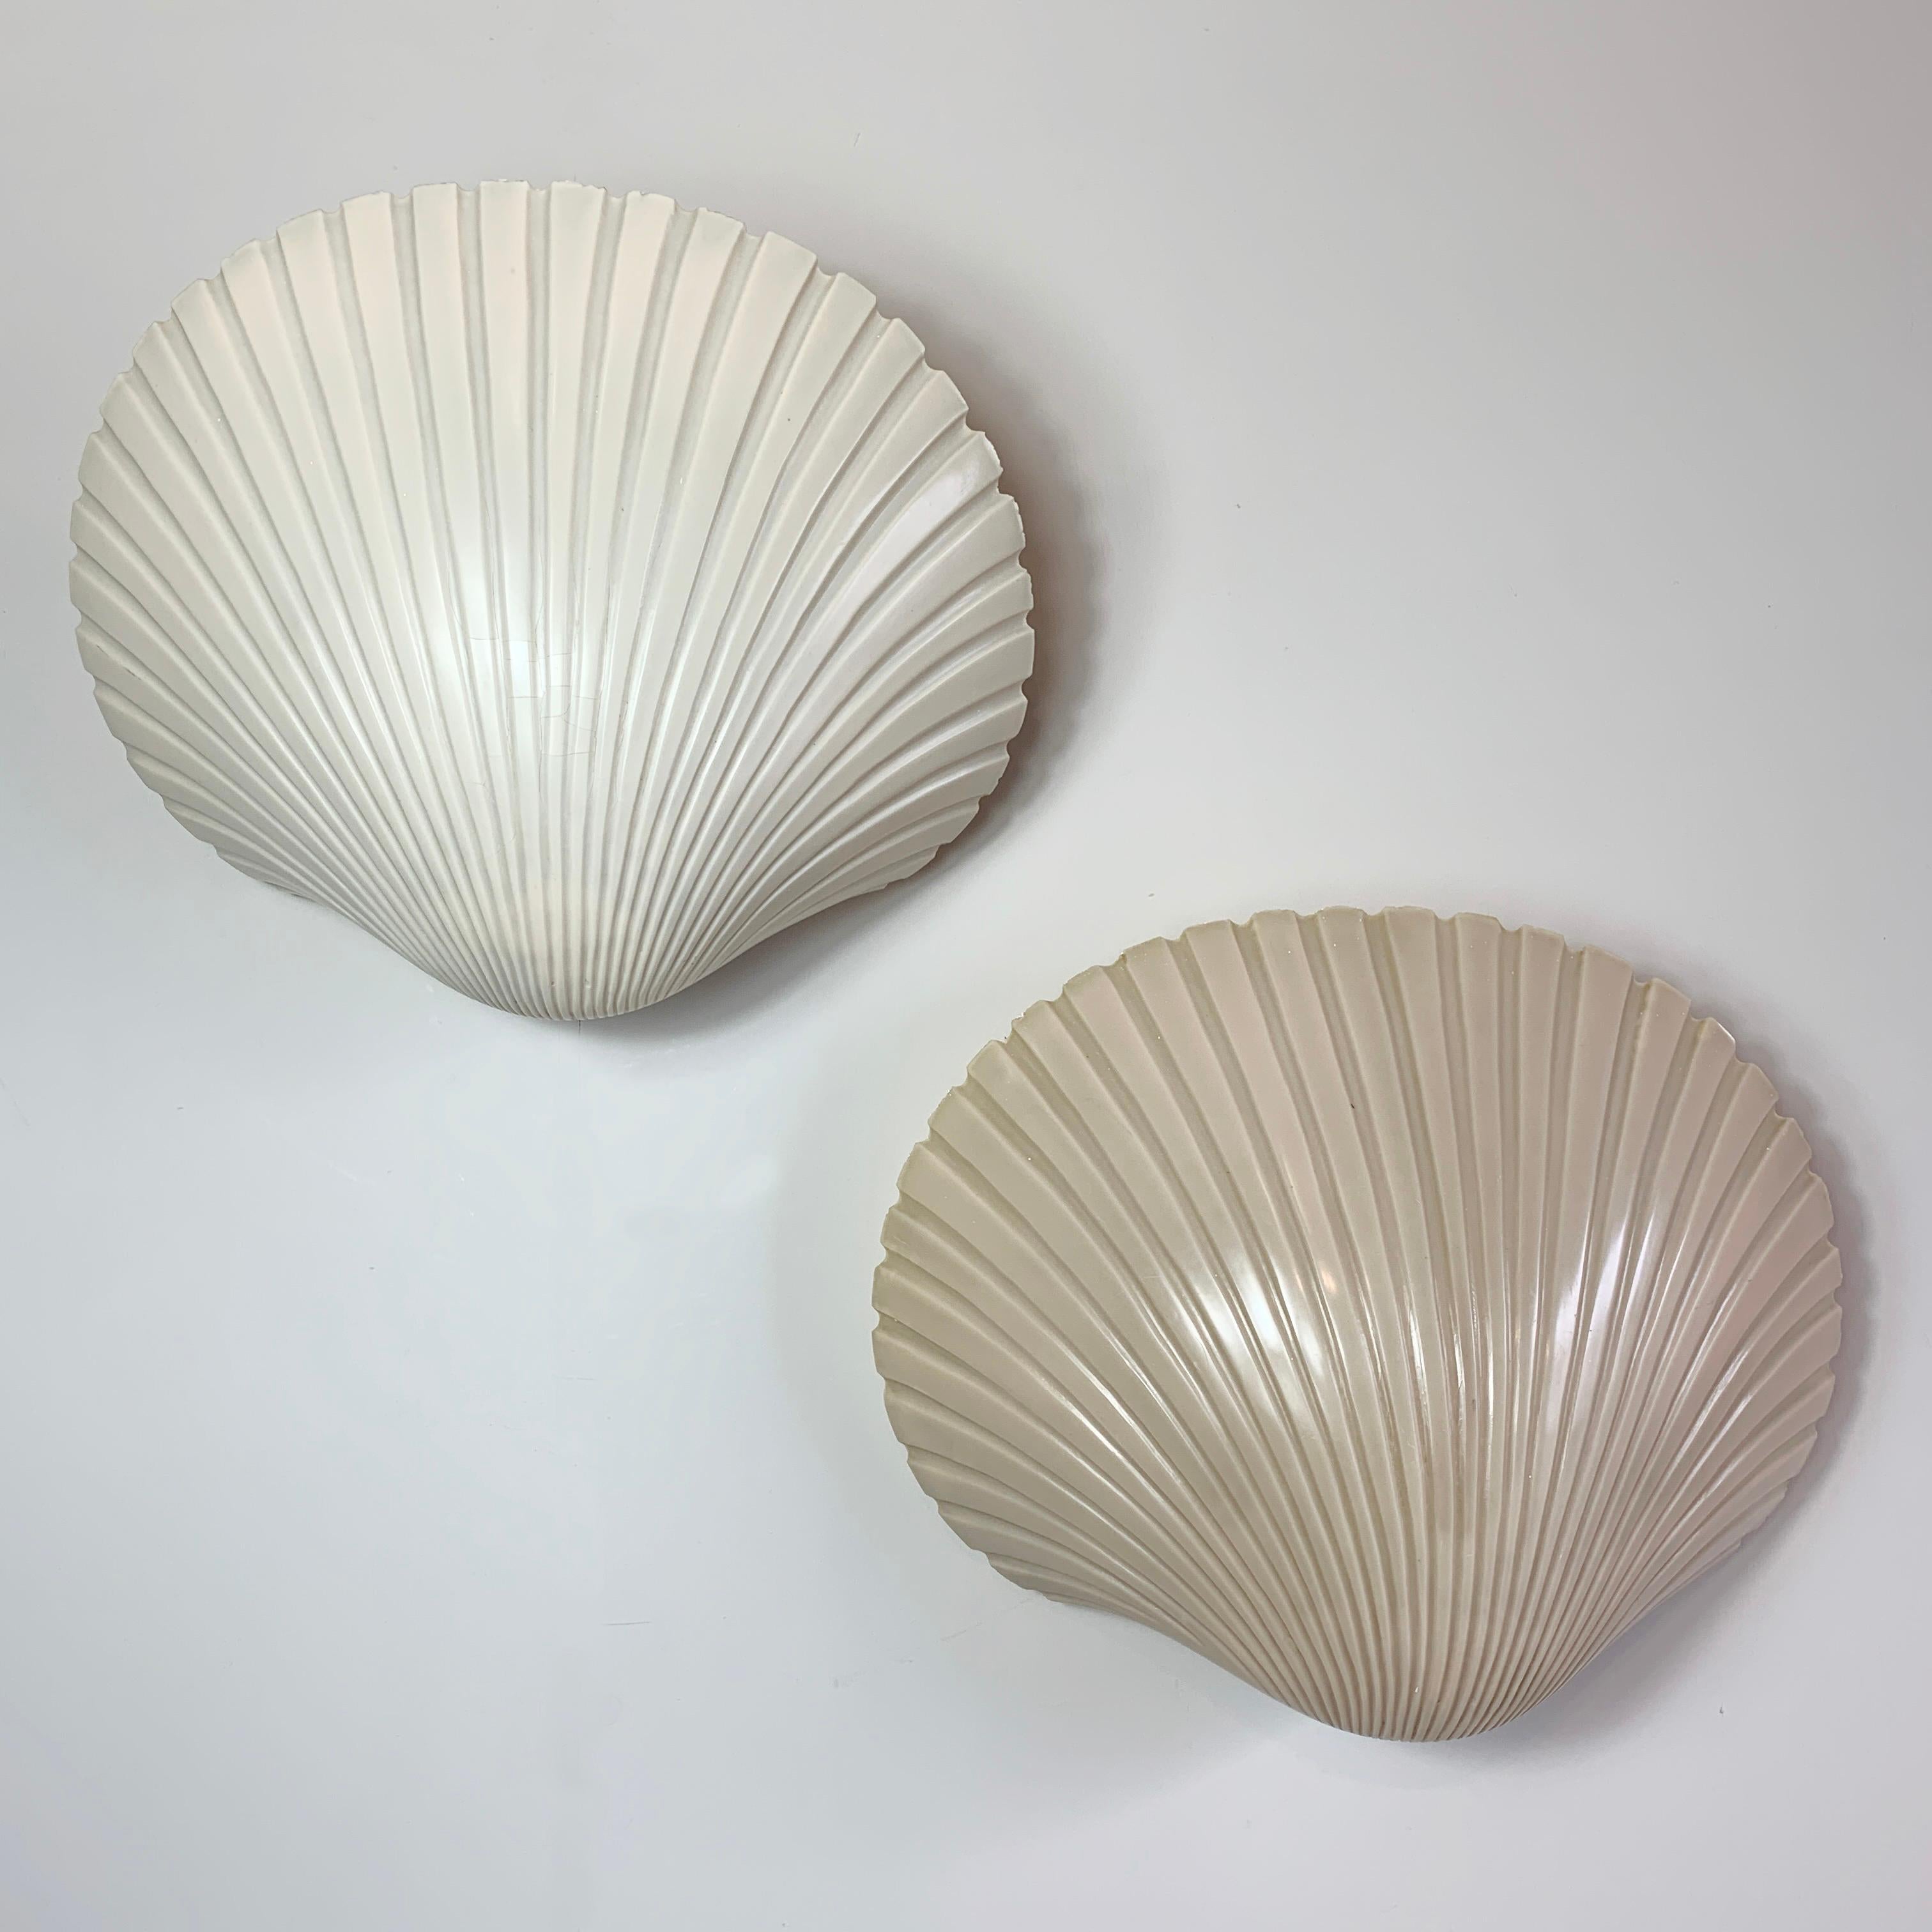 A wonderful pair of wall lamps in the form of shells by Michèle Mahé and André Cazenave for Atelier A, dating to the late 1960's the beautiful organic design is made from fibre glass.

Each lamp is unique and have slightly different colour finishes